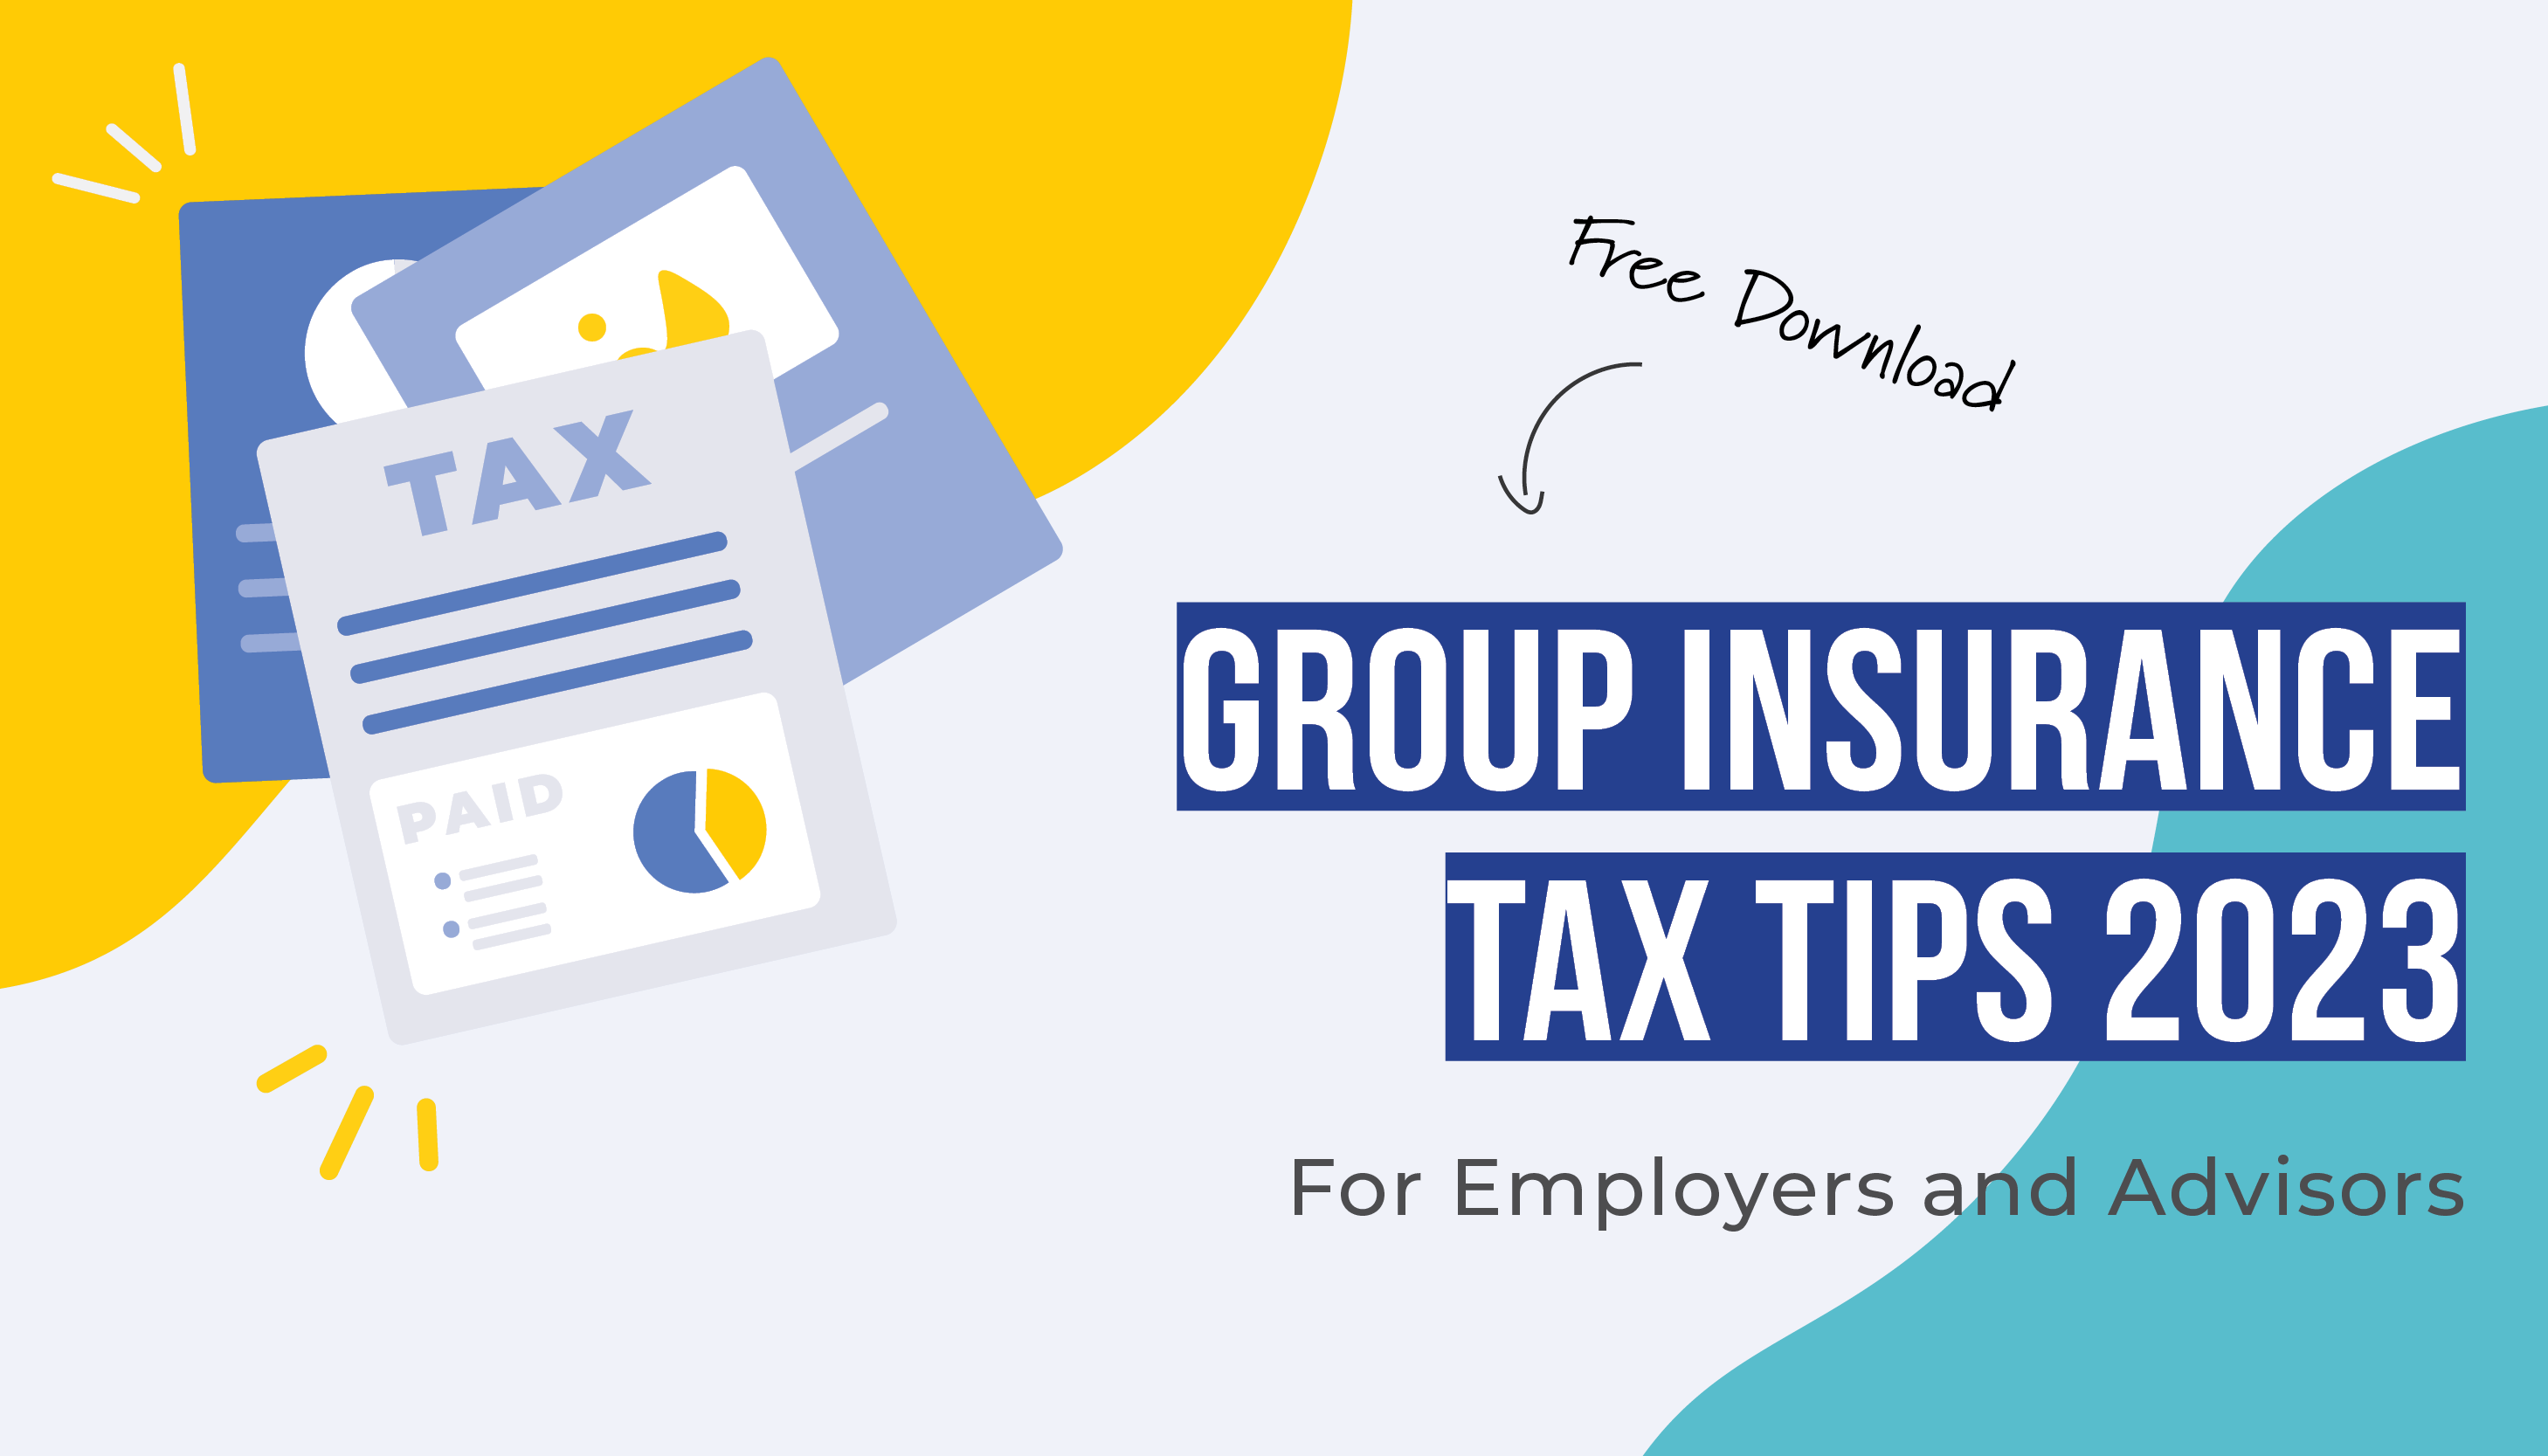 Text: Free Download - Group Insurance Tax Tips 2023 For Employers and Advisors. Image of tax forms